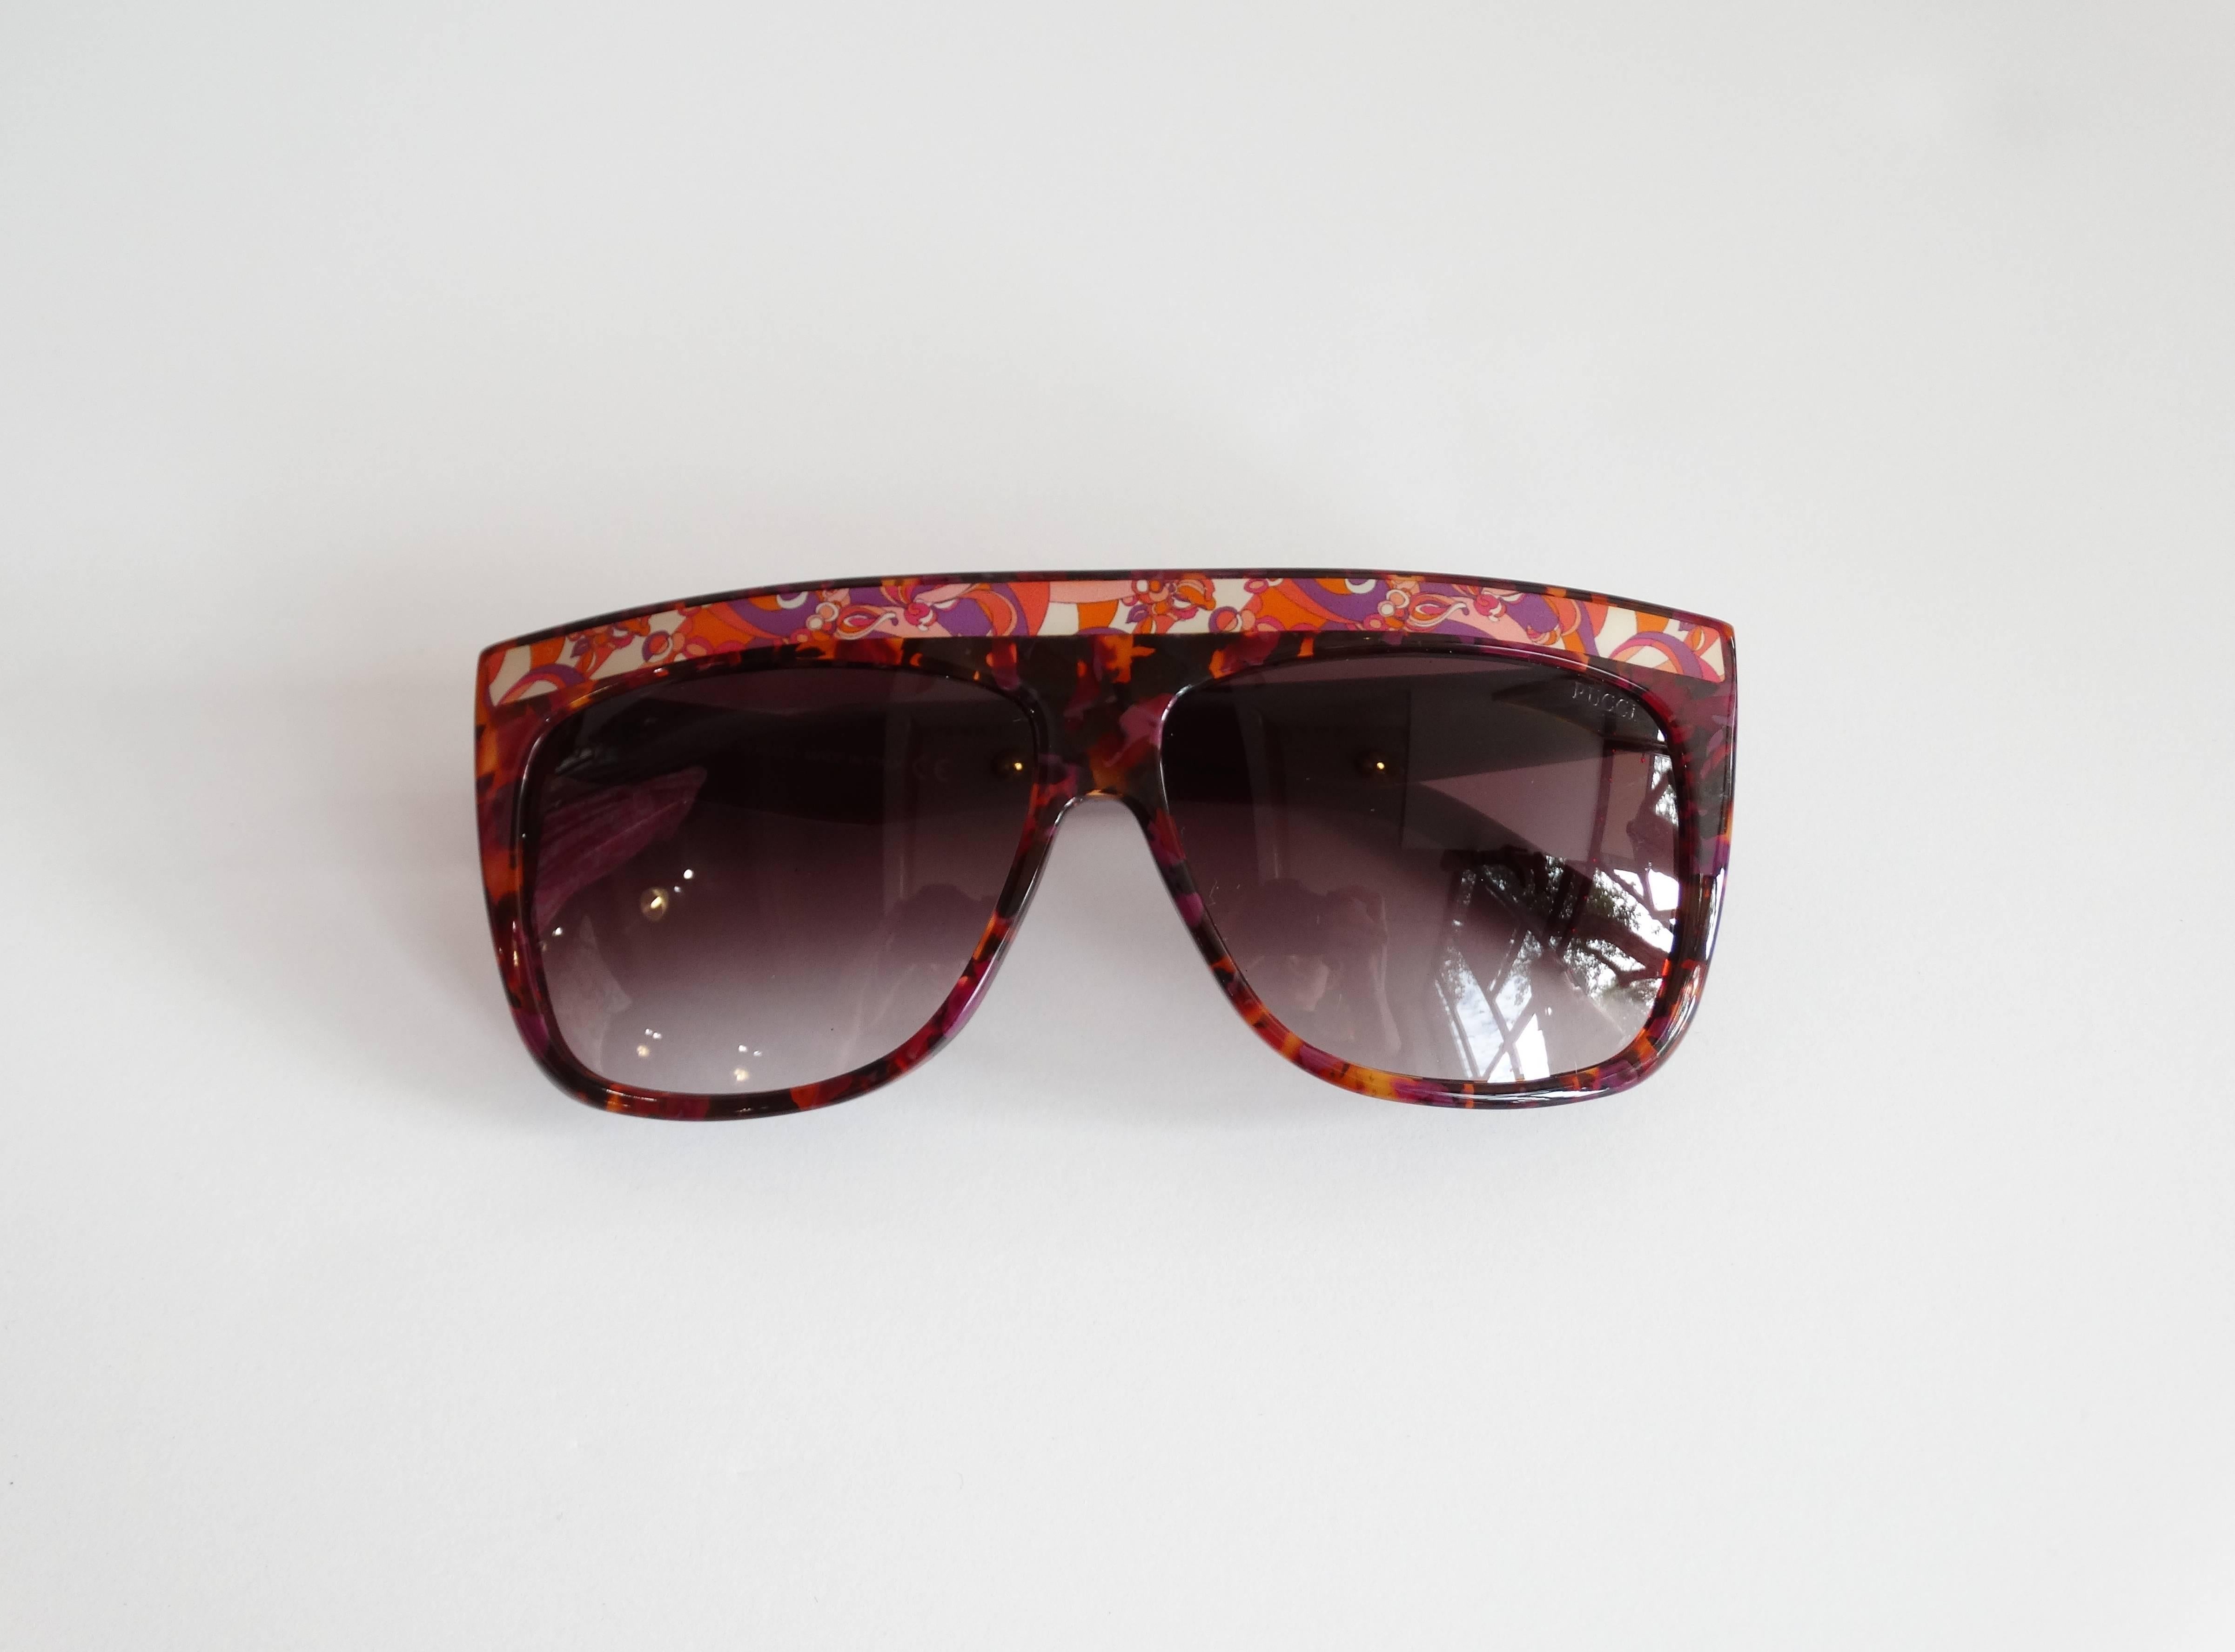 Fabulous 1990s Emilio Pucci Sunglasses! Multicolored tortoise shell confetti with Pucci’s signature psychedelic prints along the brow and arms. Comes with original carrying case and bag. Made in Italy 5 1/2 inches across the brow 
